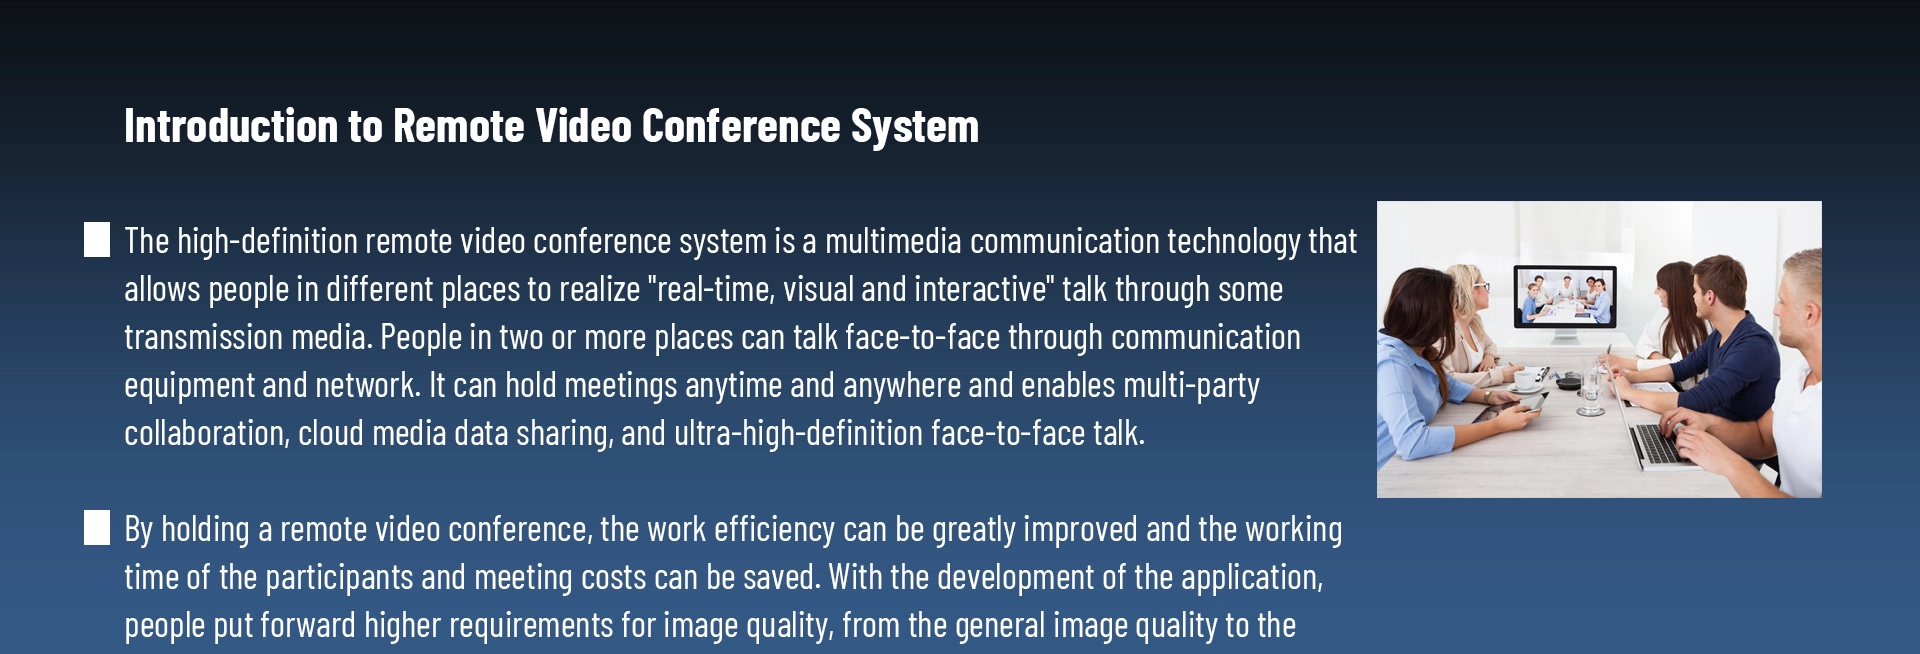 HD Video Conference MCU (16 channel)